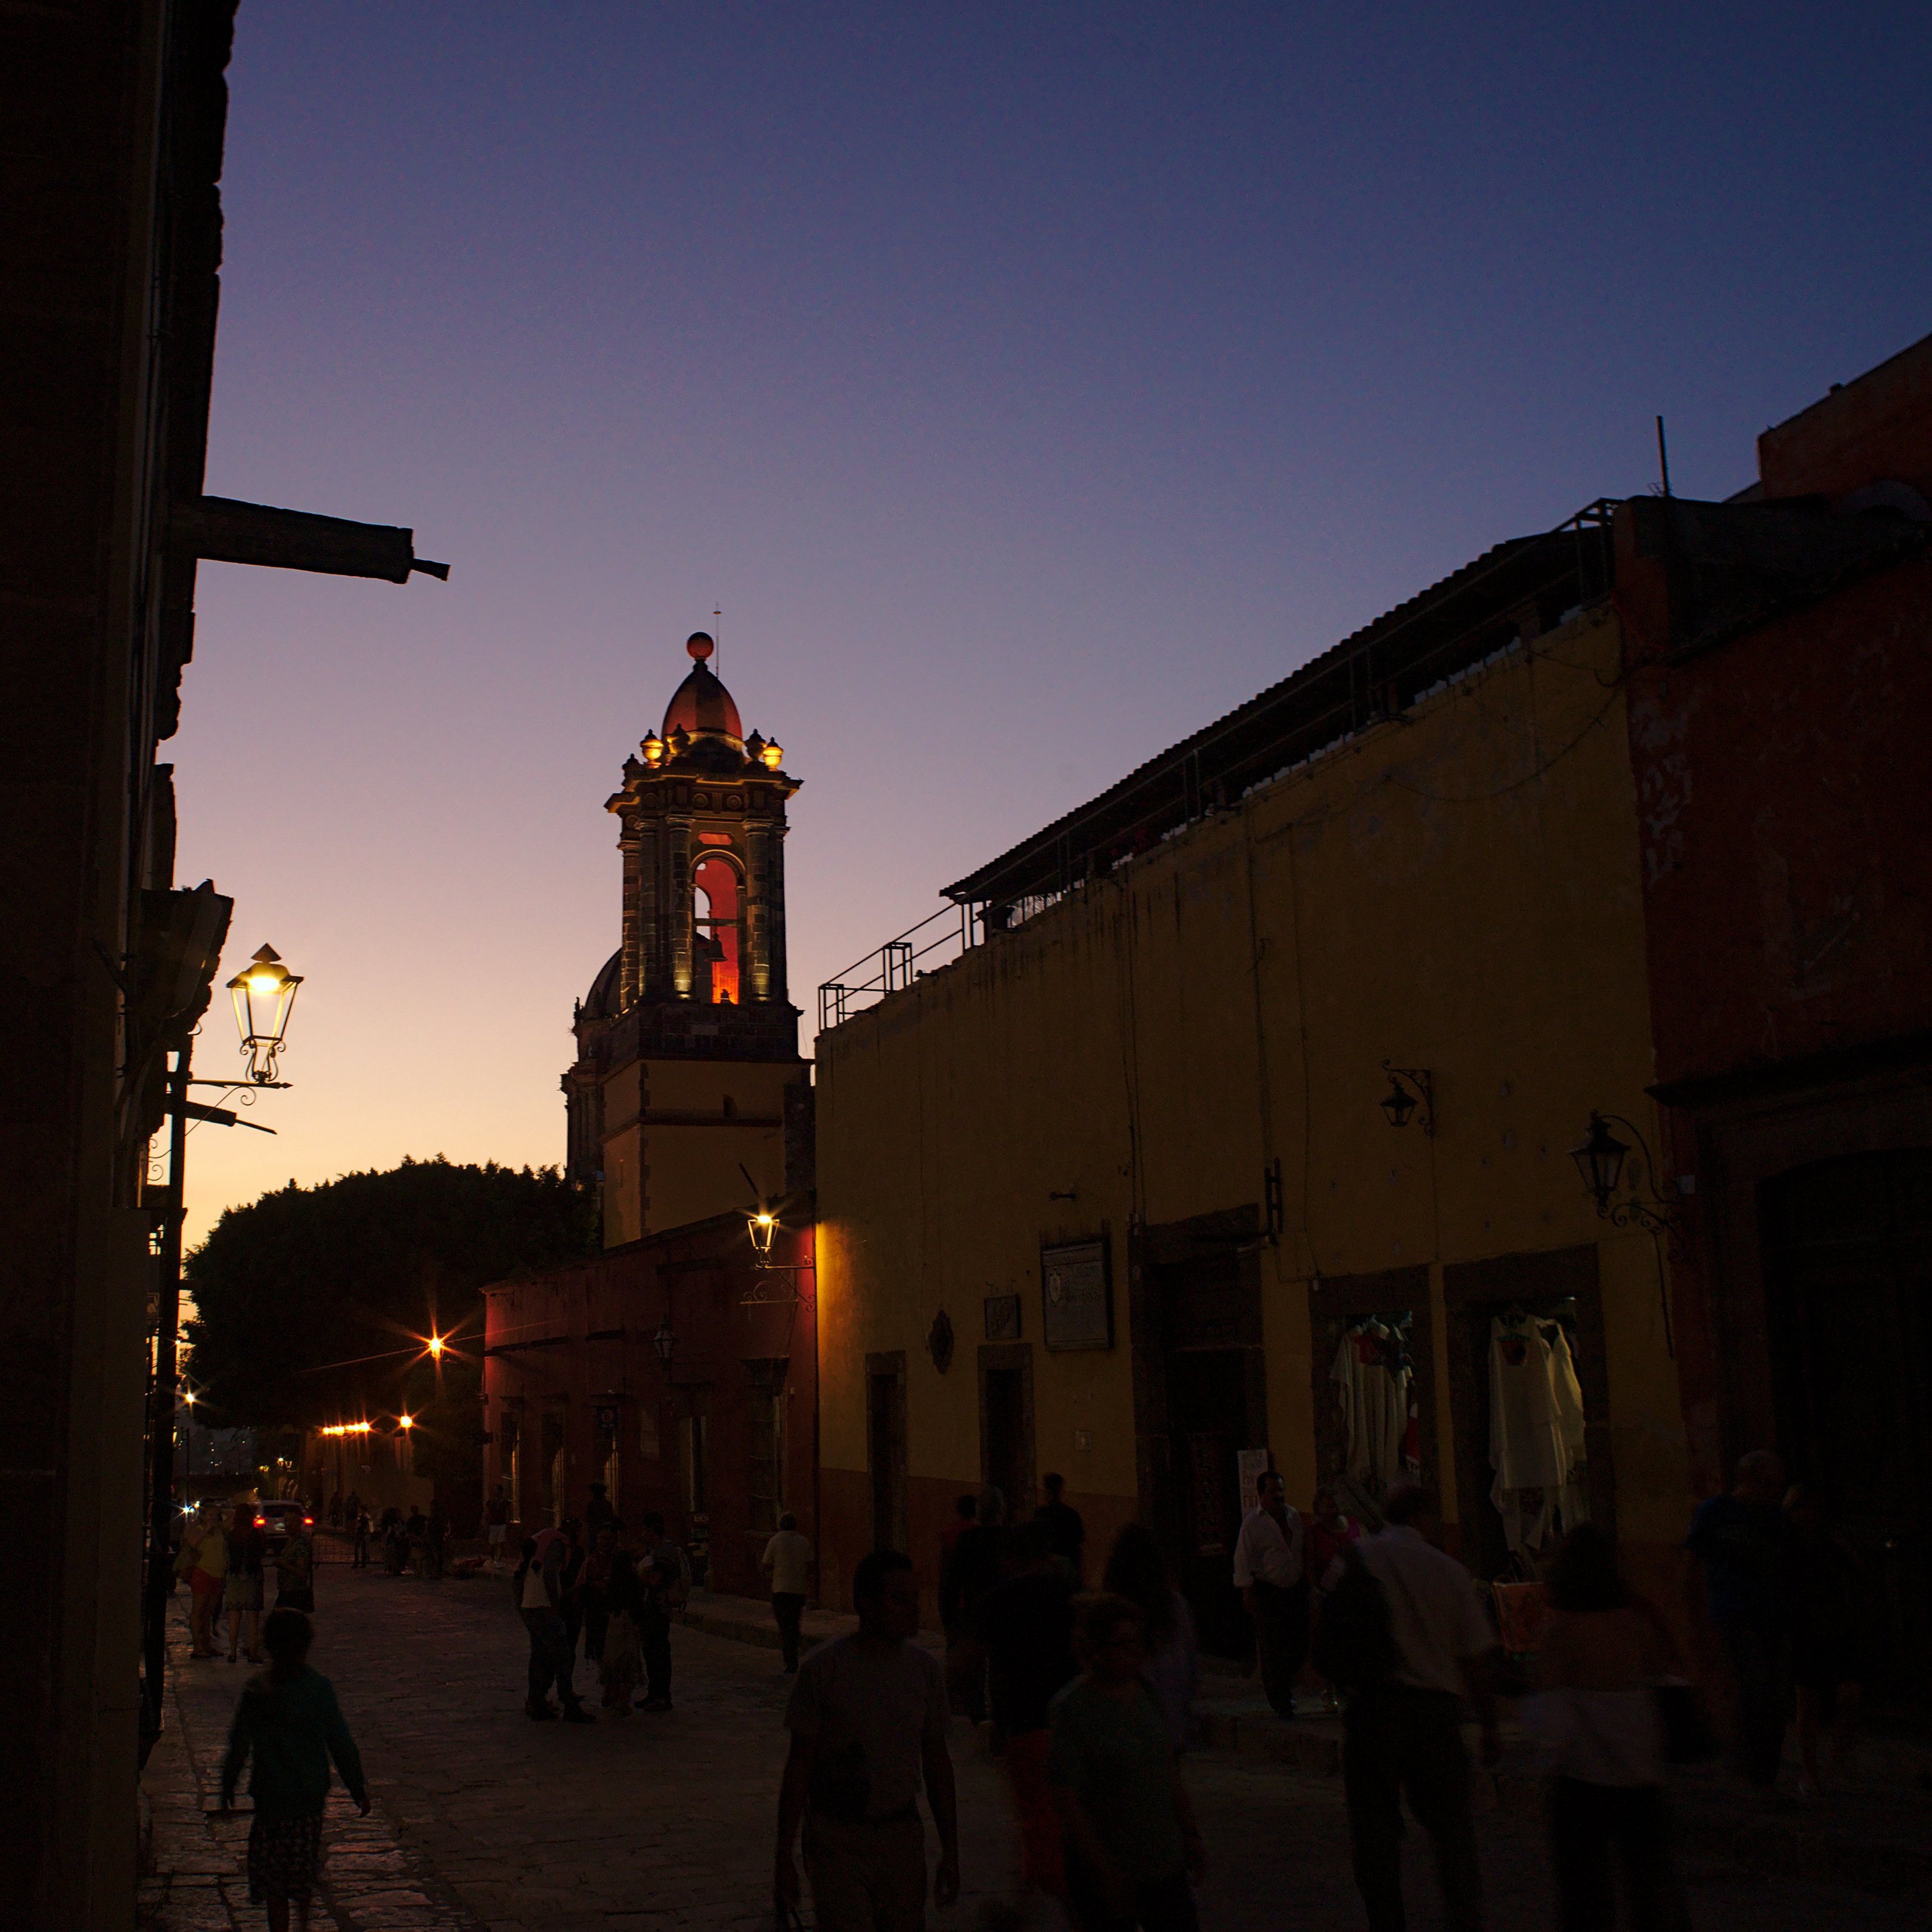 Church at twilight, San miguel de Allende photographed by luxagraf